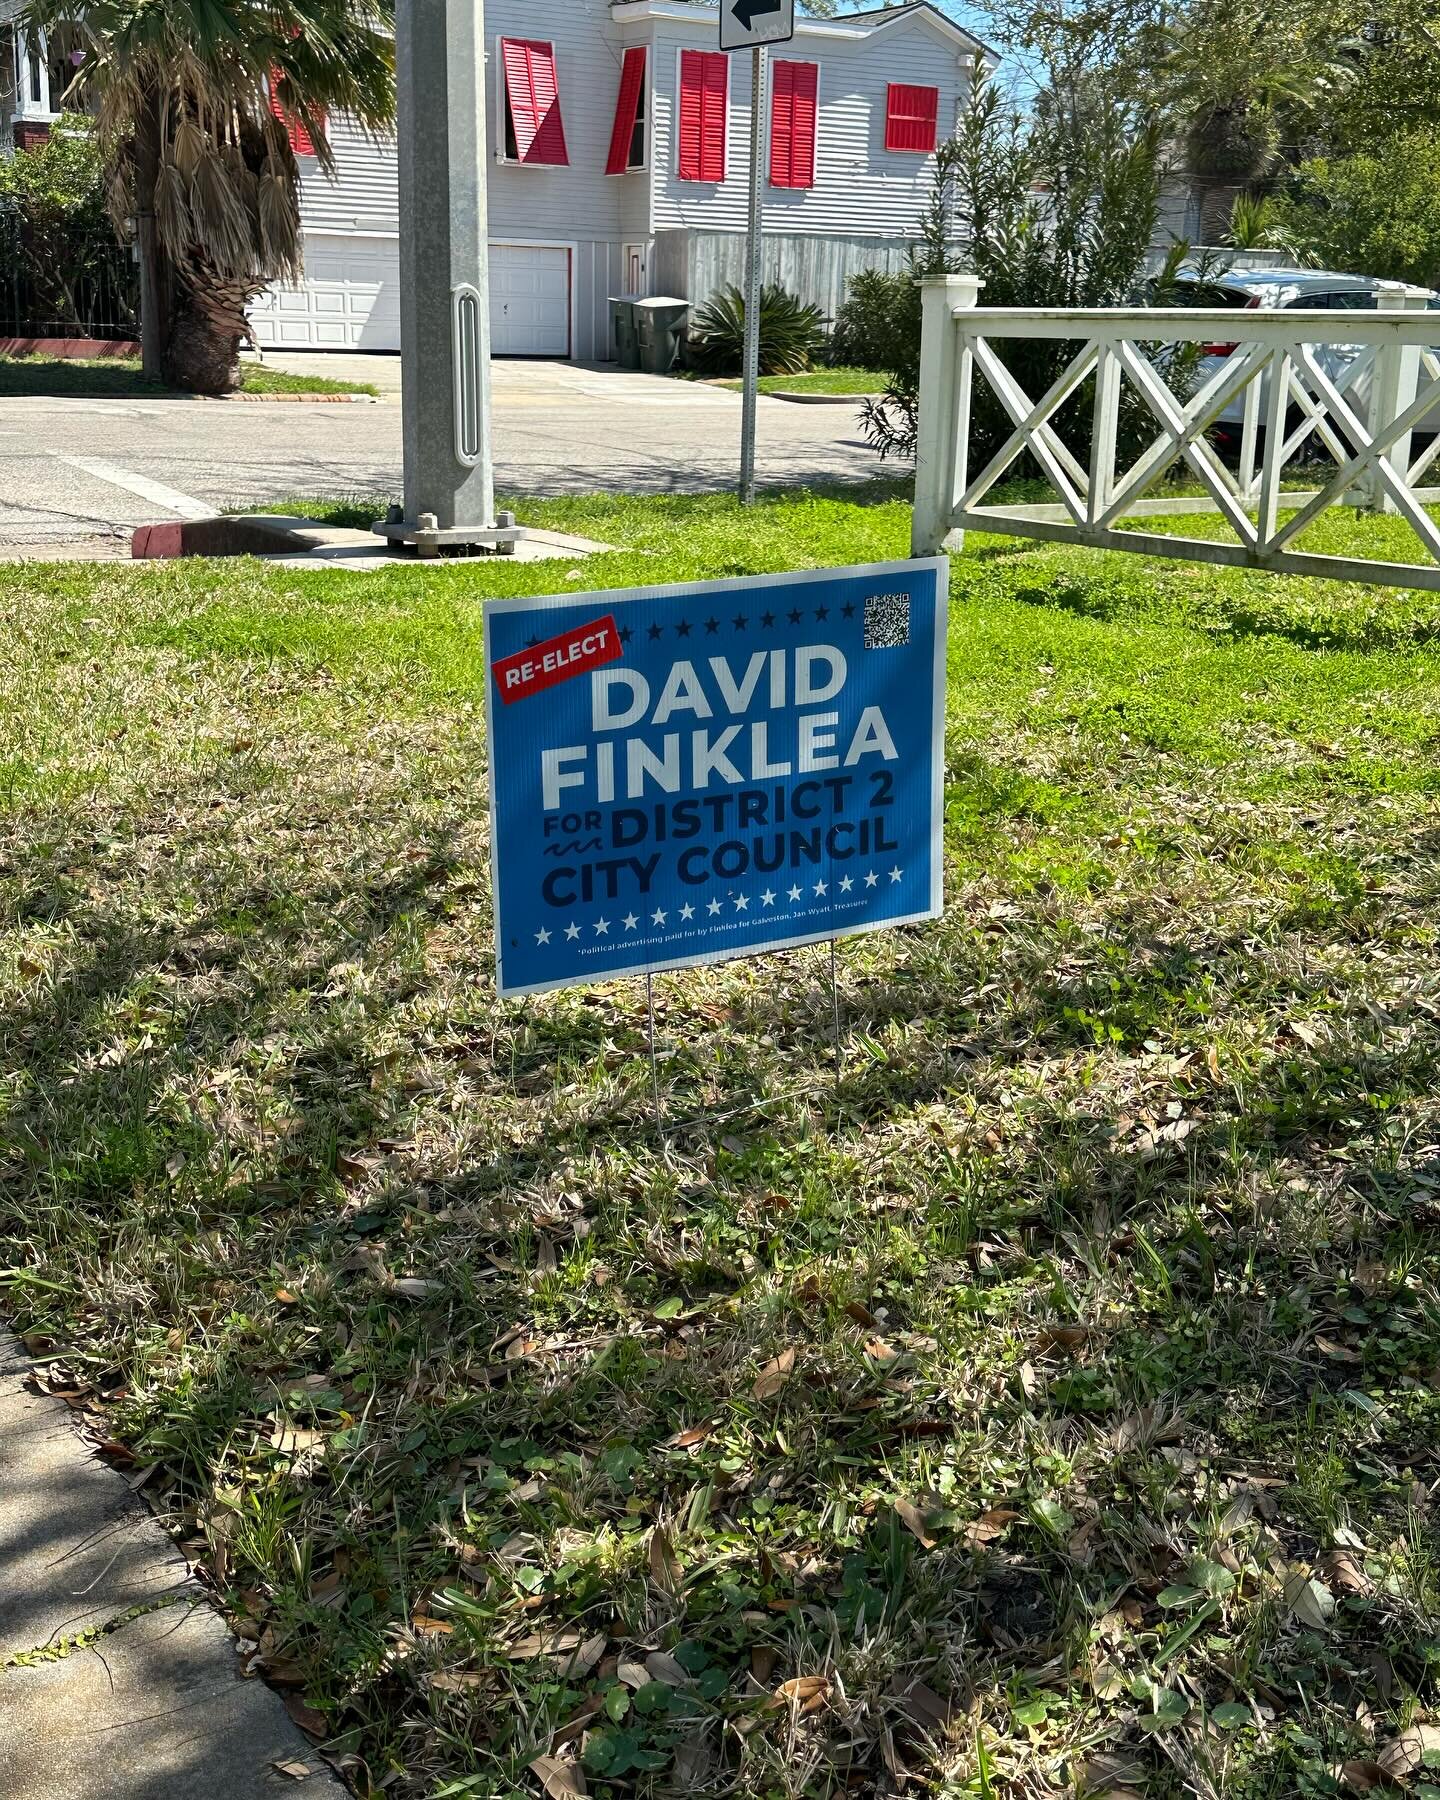 Beautiful day on the island to start dropping yard signs!  You can request one for free at www.finkleaforgalveston.com #finkleaforgalveston #finkleafordistrict2 @suzannebuyshouses @della.shorman @blaircurra @brianschwenktexasrealtor @michelledieckhof